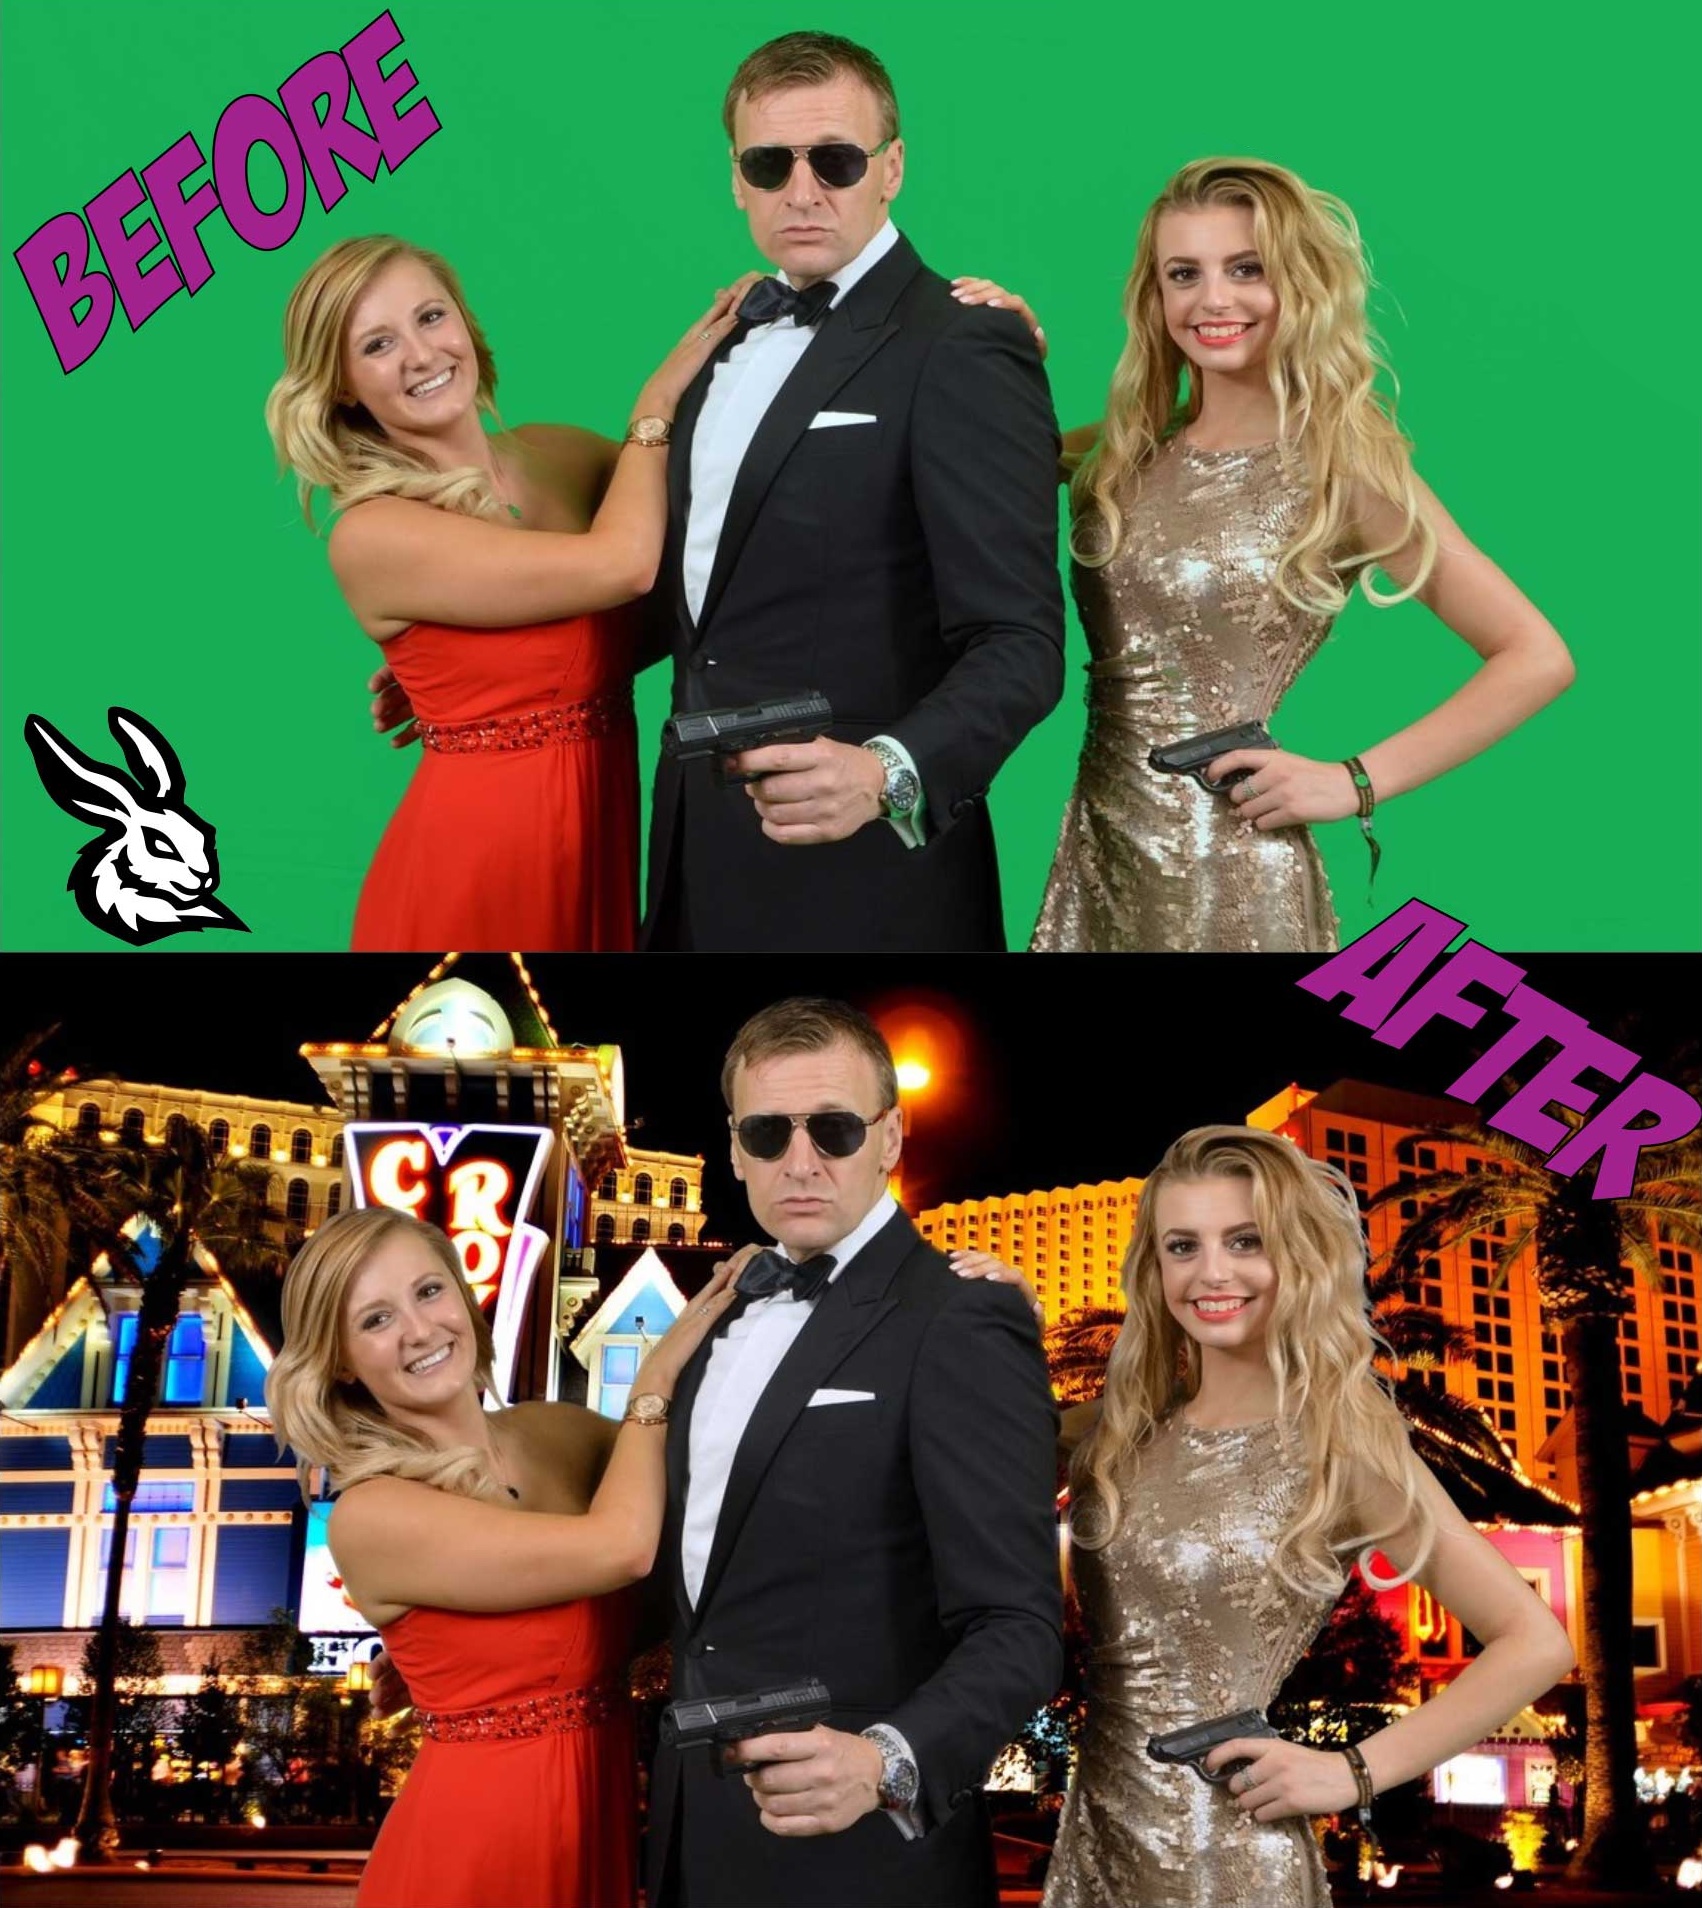 Green Screen photobooth before and After